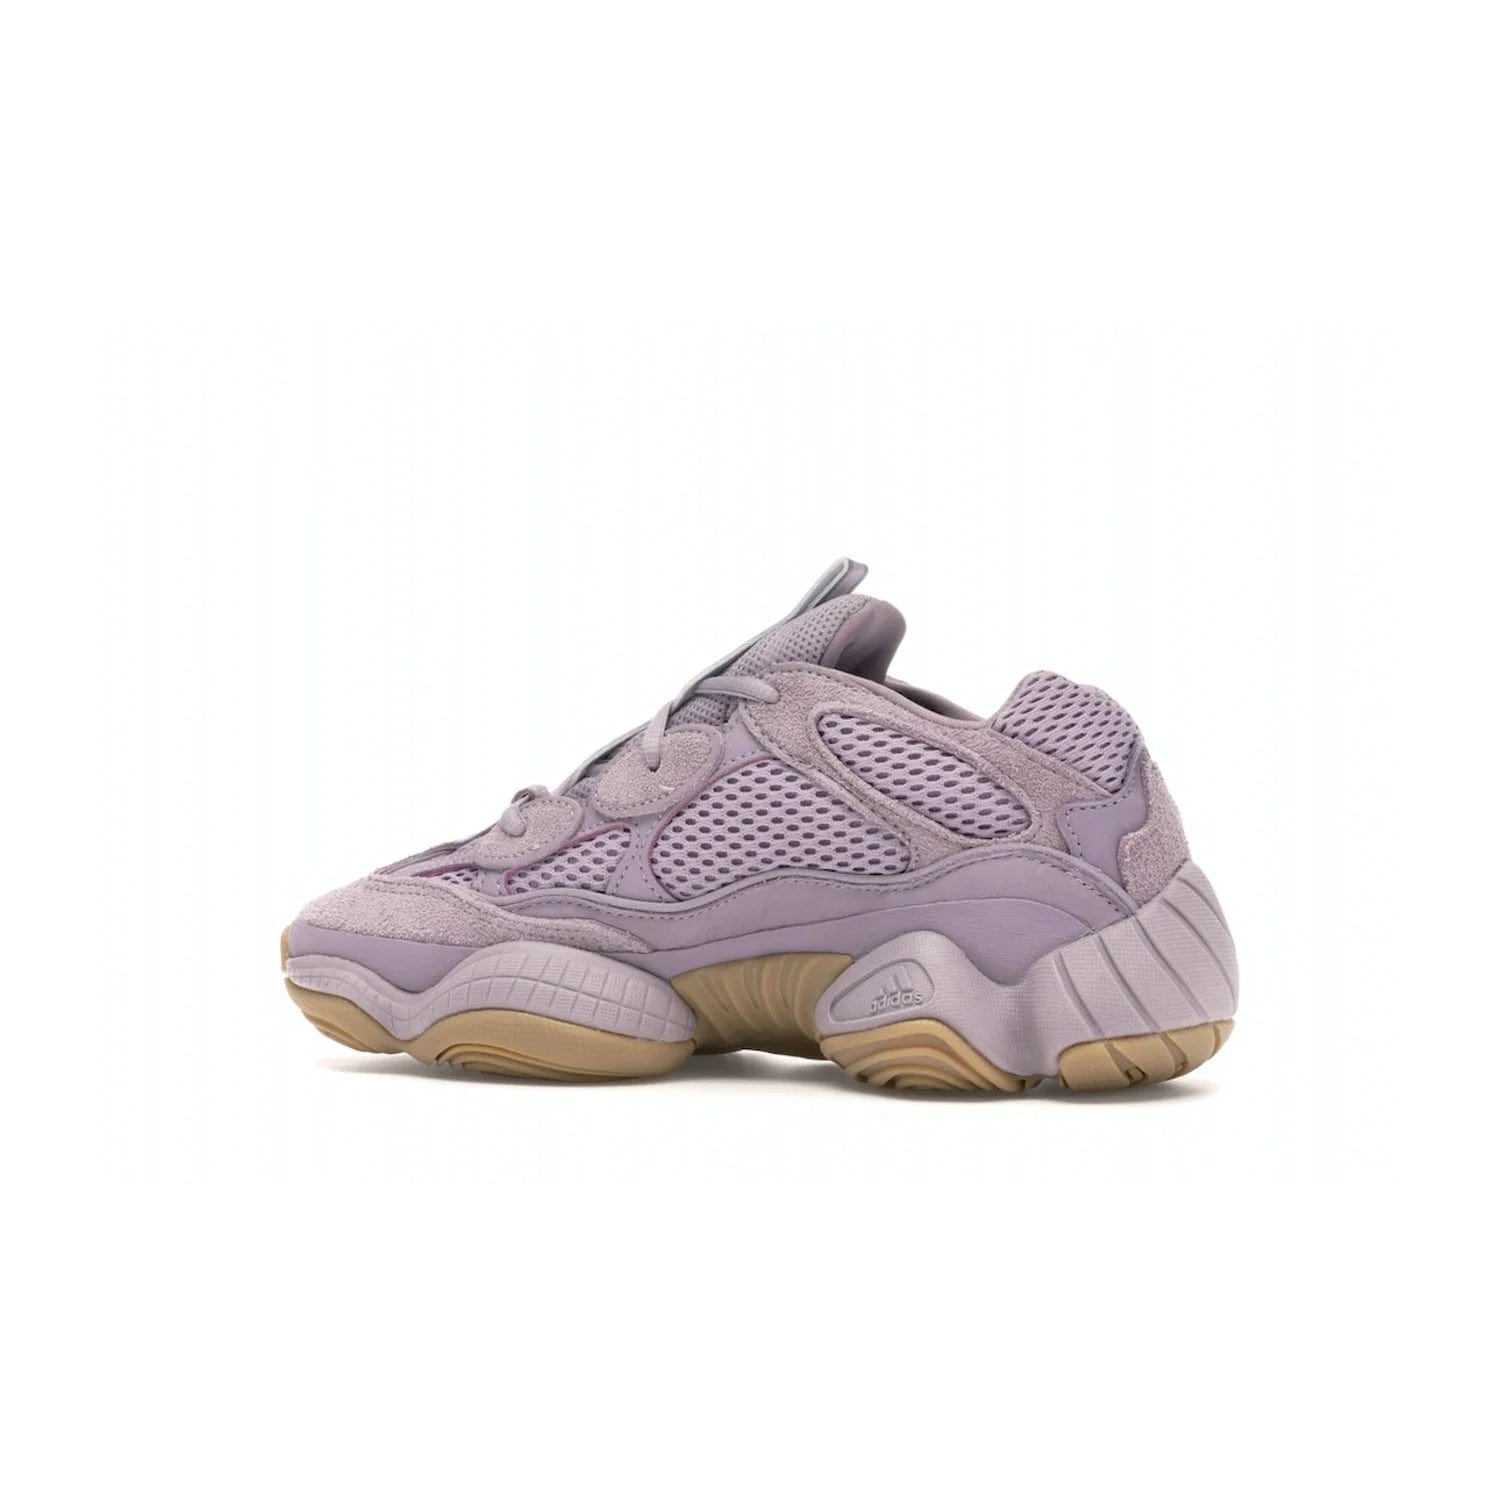 adidas Yeezy 500 Soft Vision - Image 21 - Only at www.BallersClubKickz.com - New adidas Yeezy 500 Soft Vision sneaker featuring a combination of mesh, leather, and suede in a classic Soft Vision colorway. Gum rubber outsole ensures durability and traction. An everyday sneaker that stands out from the crowd.